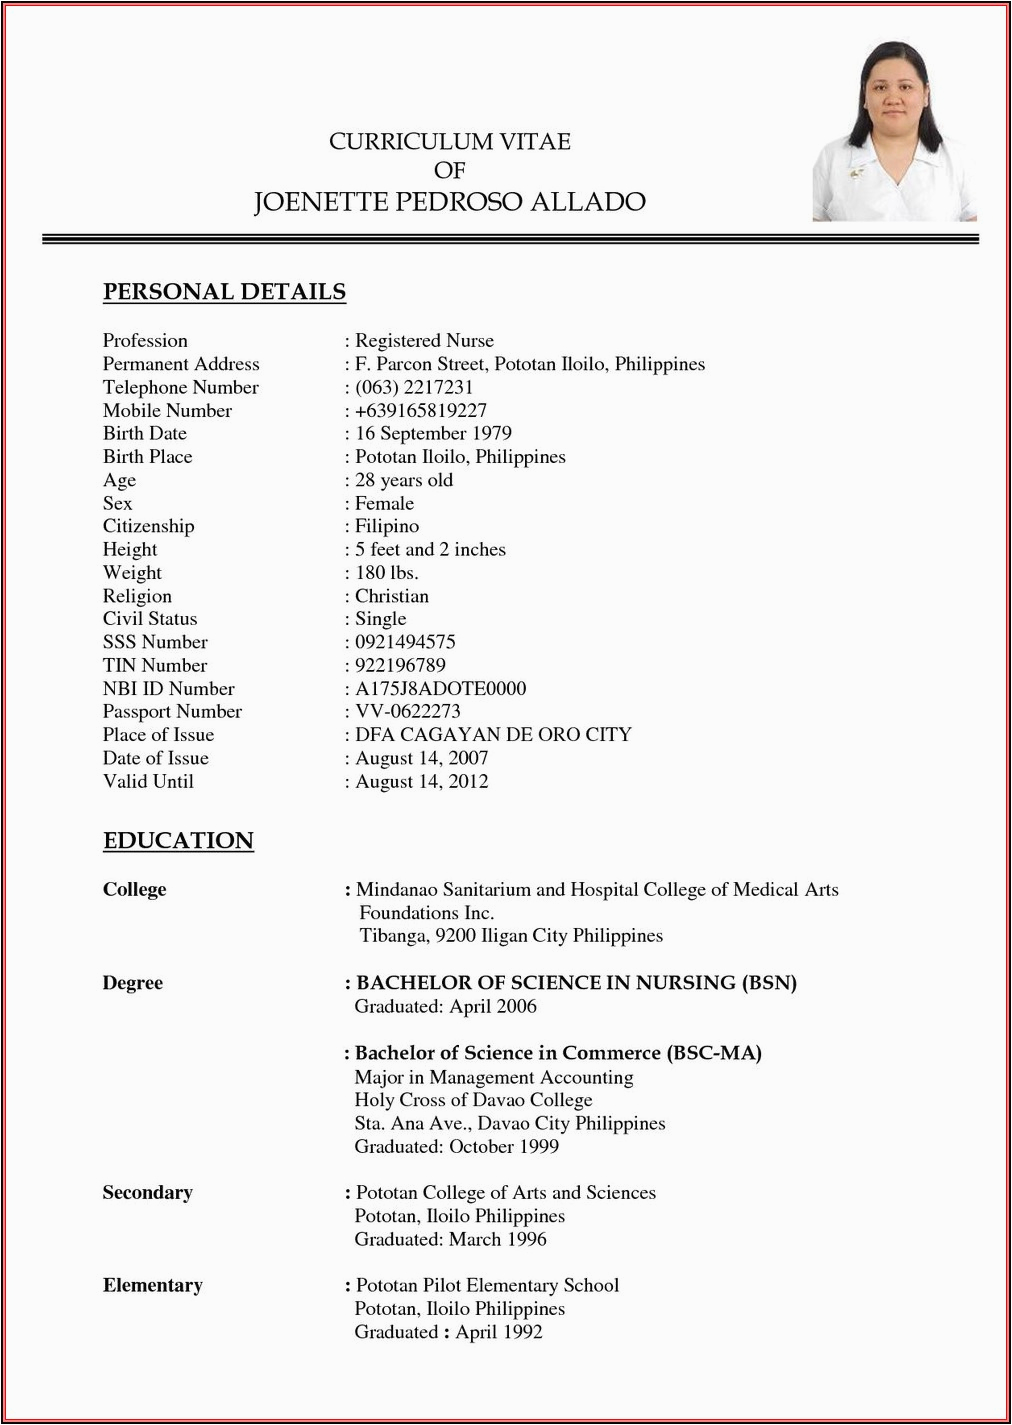 Resume Sample for Nurses without Experience Philippines Pany bylaws Sample Philippines Template 1 Resume Examples